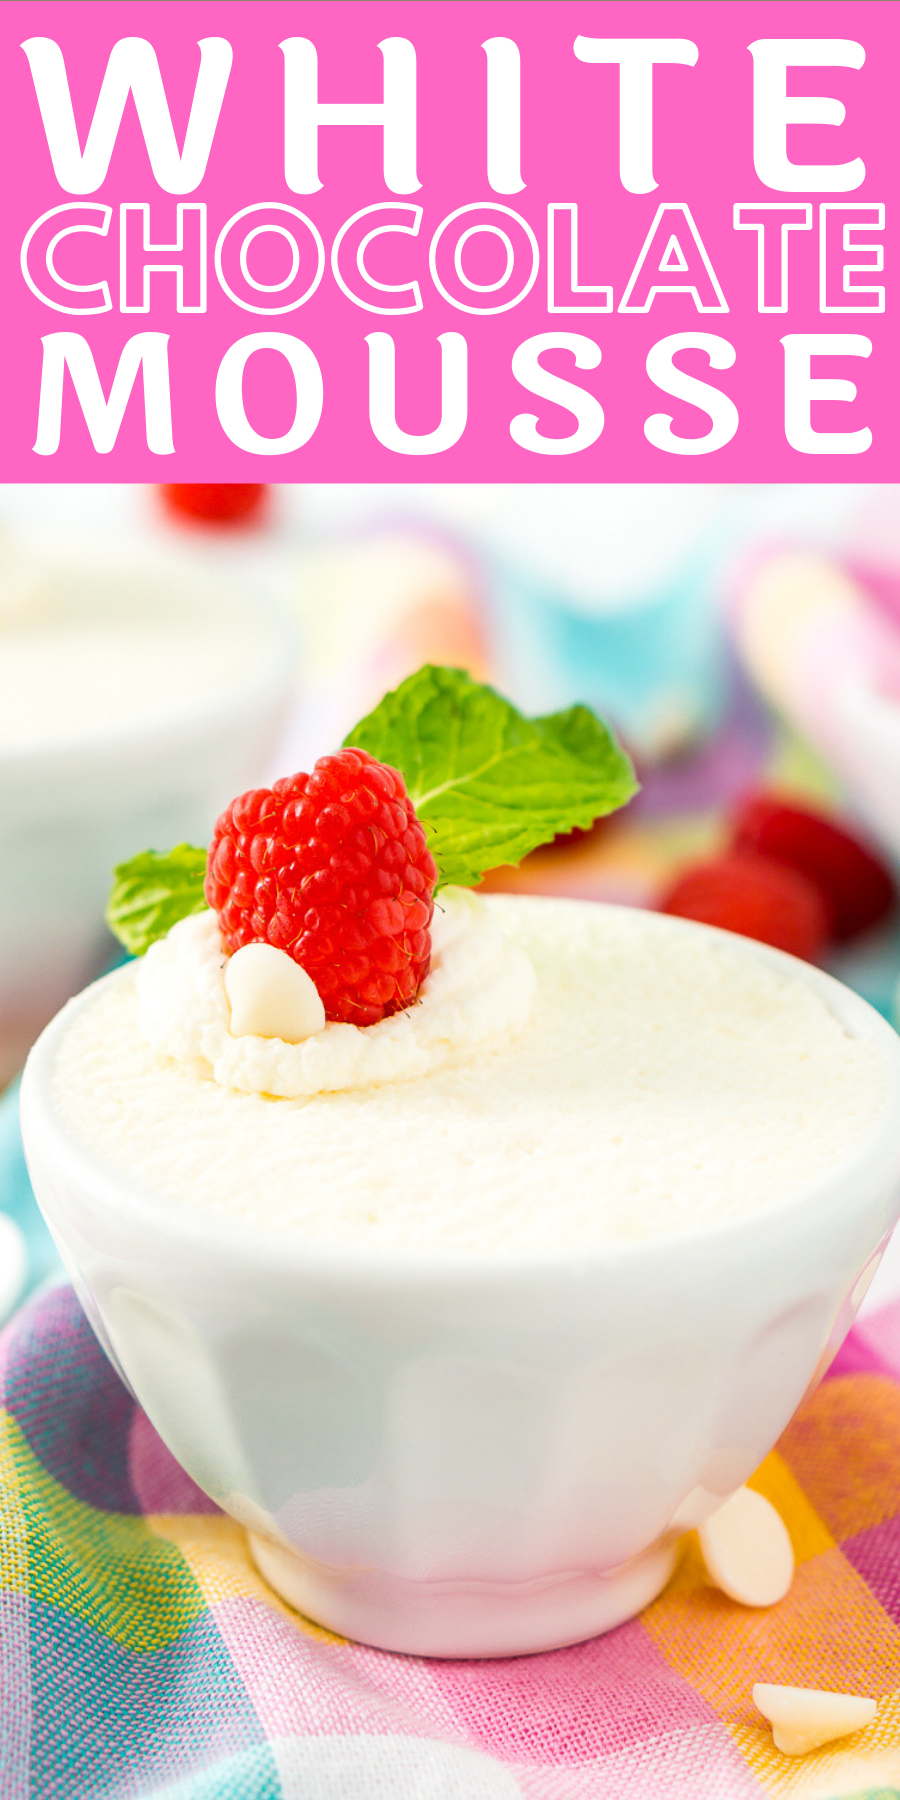 This 2-Ingredient White Chocolate Mousse is a delicious and simple dessert for special occasions made with just white chocolate and heavy cream.